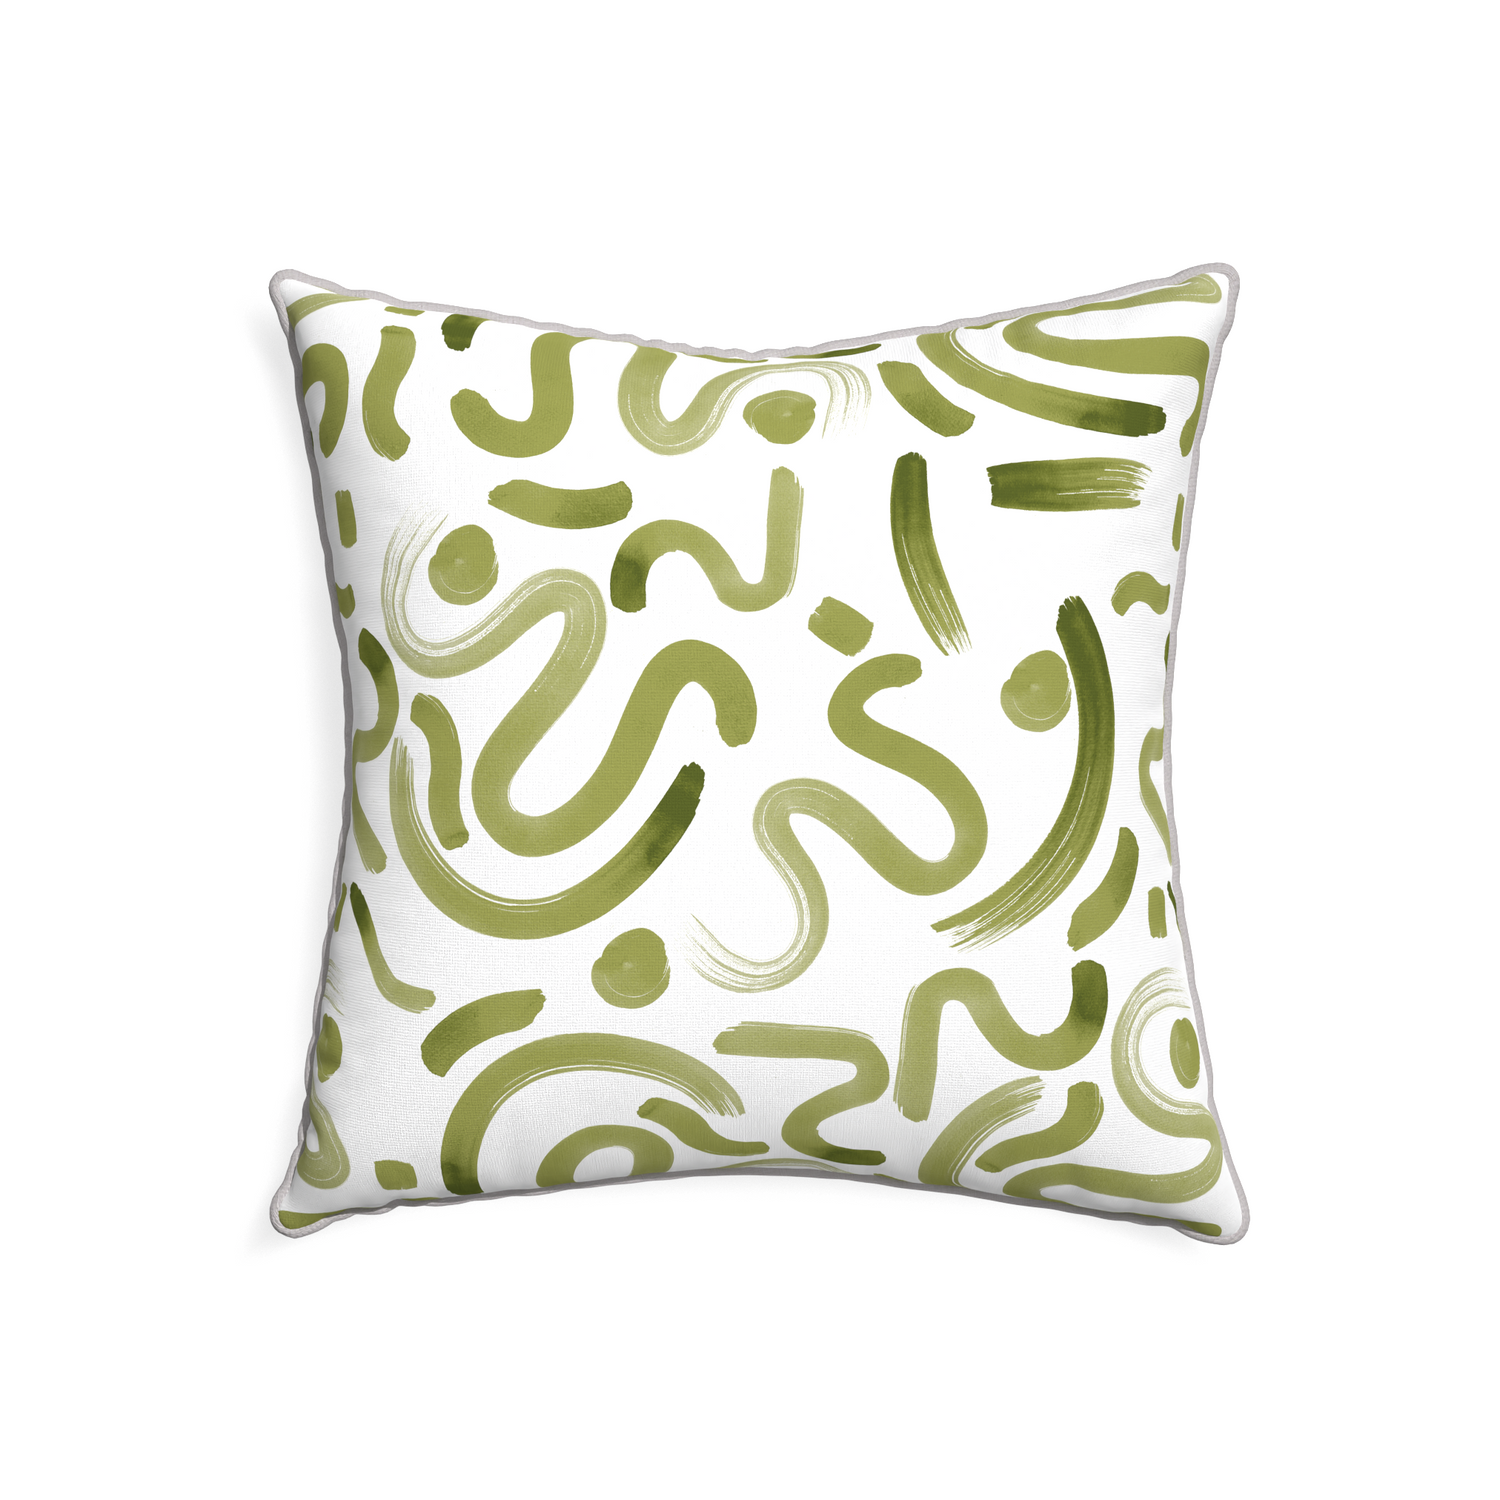 22-square hockney moss custom moss greenpillow with pebble piping on white background